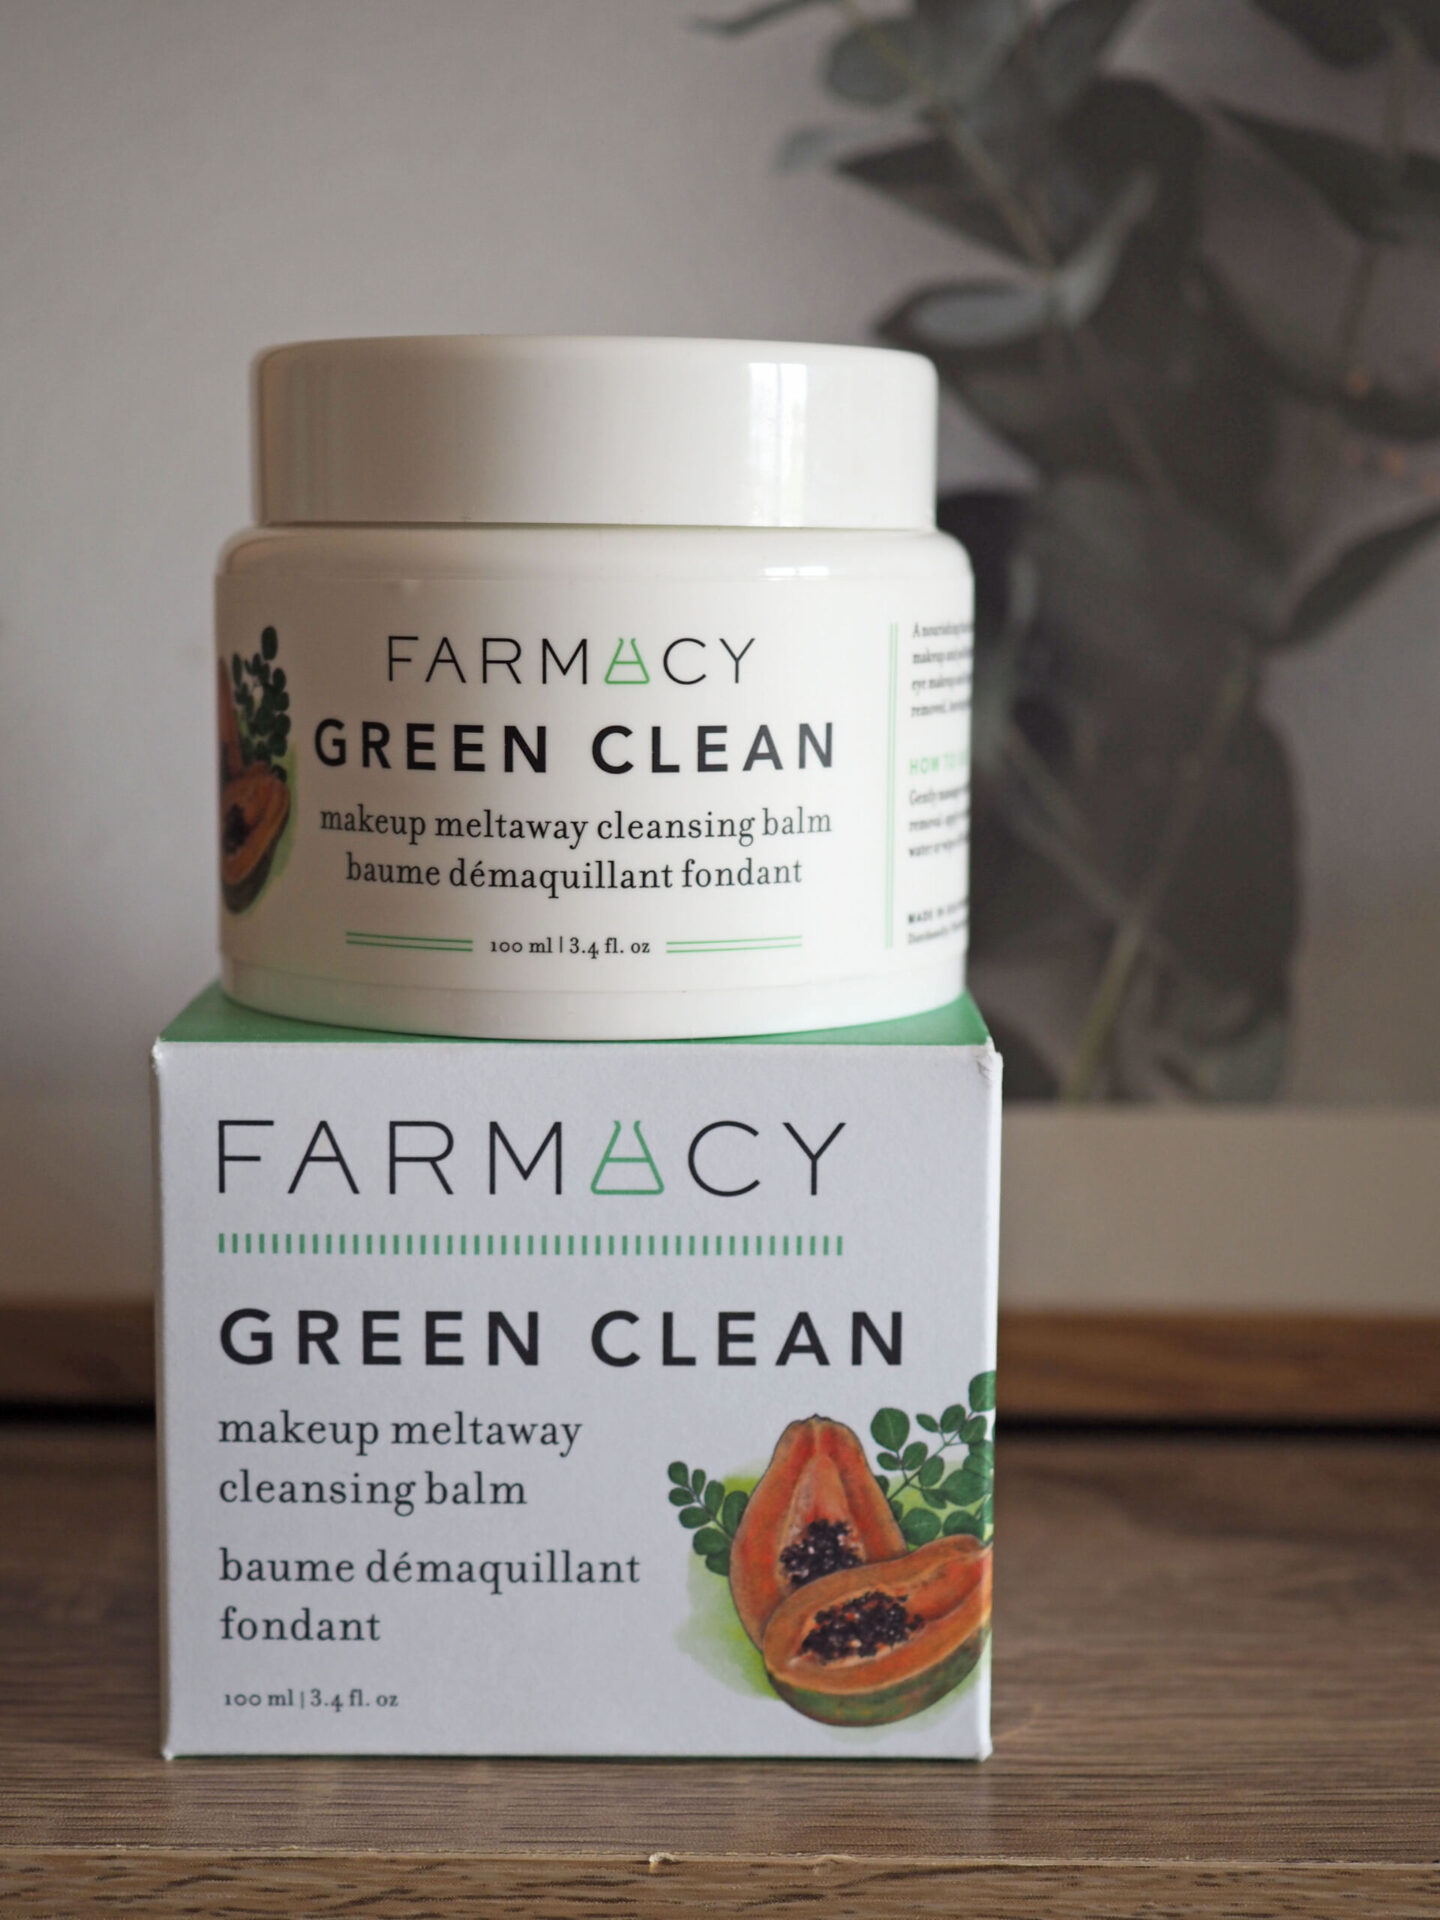 Farmacy green clean makeup meltaway cleansing balm review